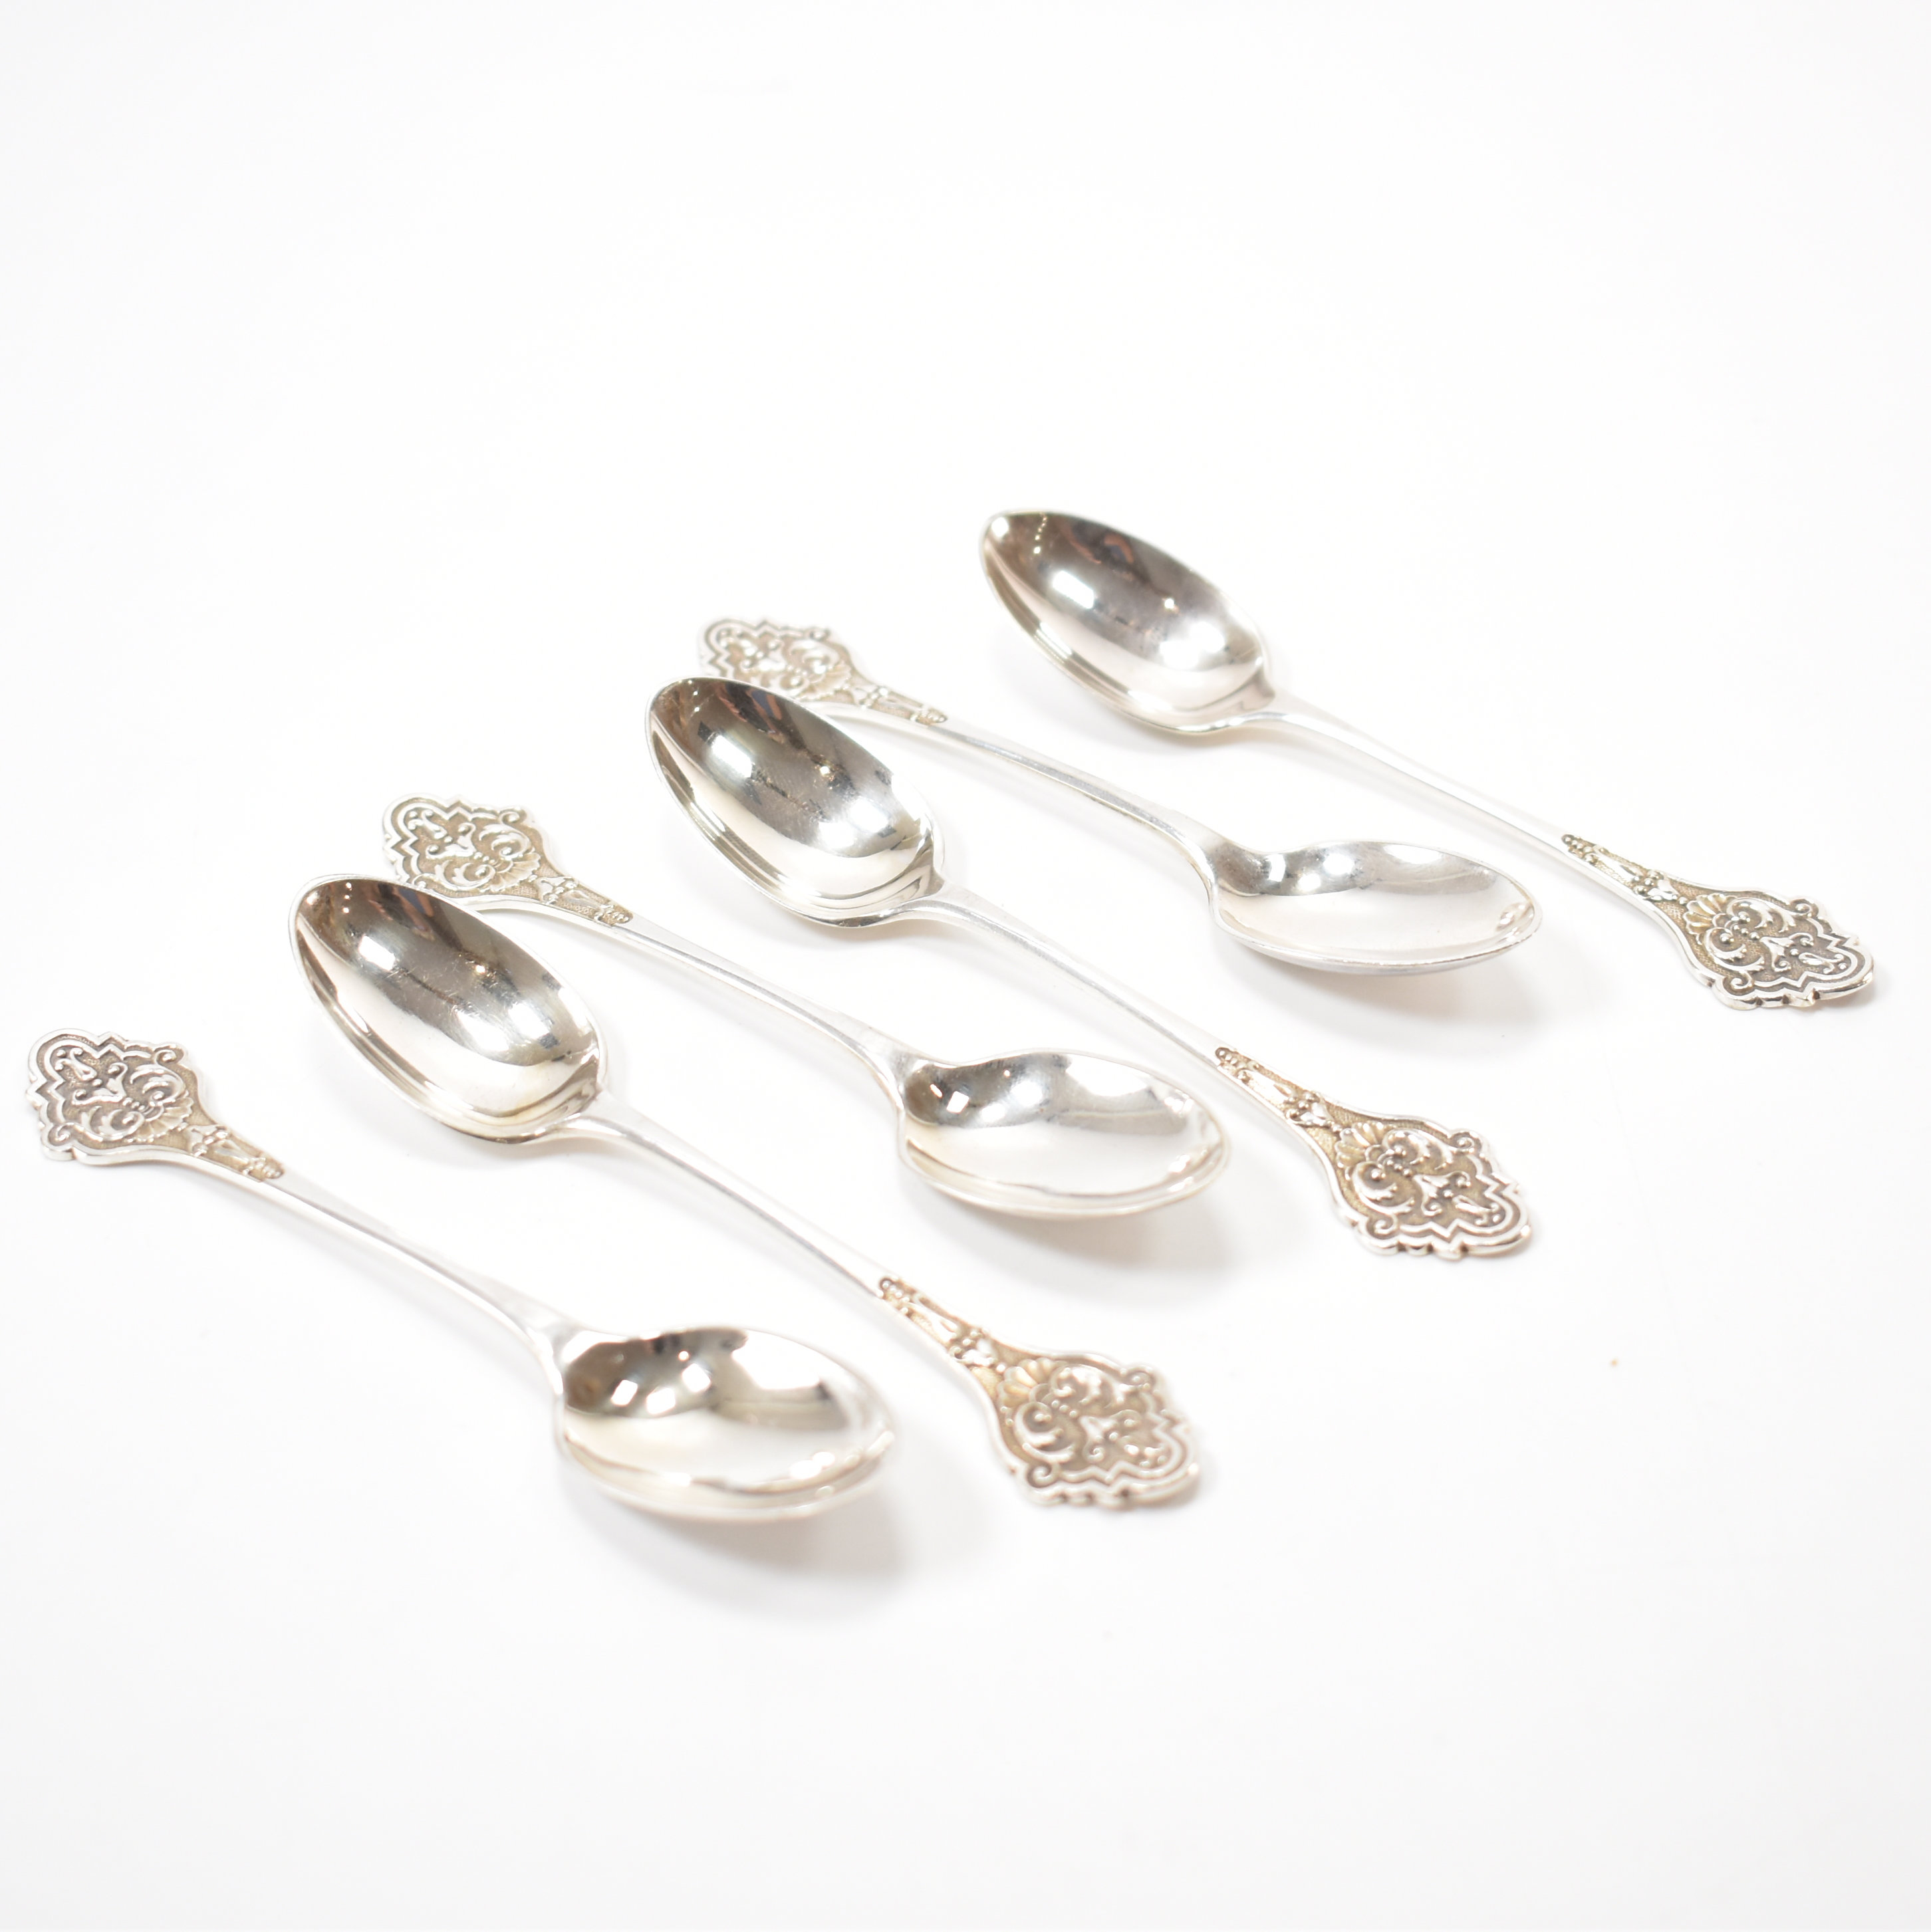 SIX VICTORIAN THOMAS PRIME SILVER PLATED TEA SPOONS